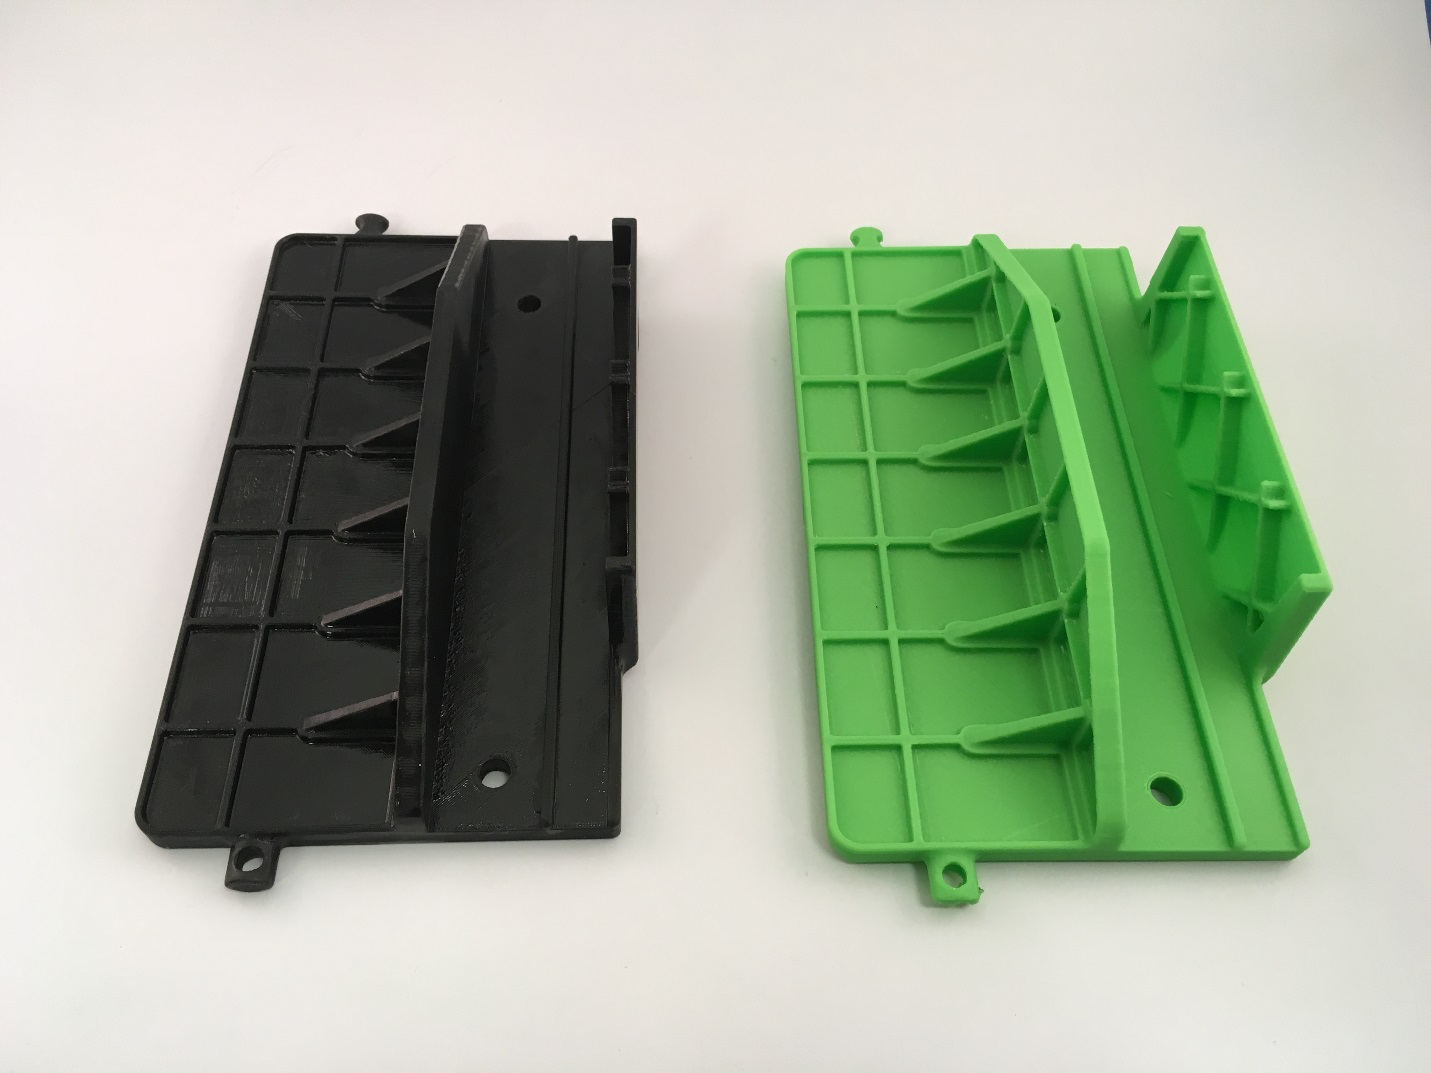  Comparing 3D prints from high-end industrial equipment vs low-cost desktop equipment 